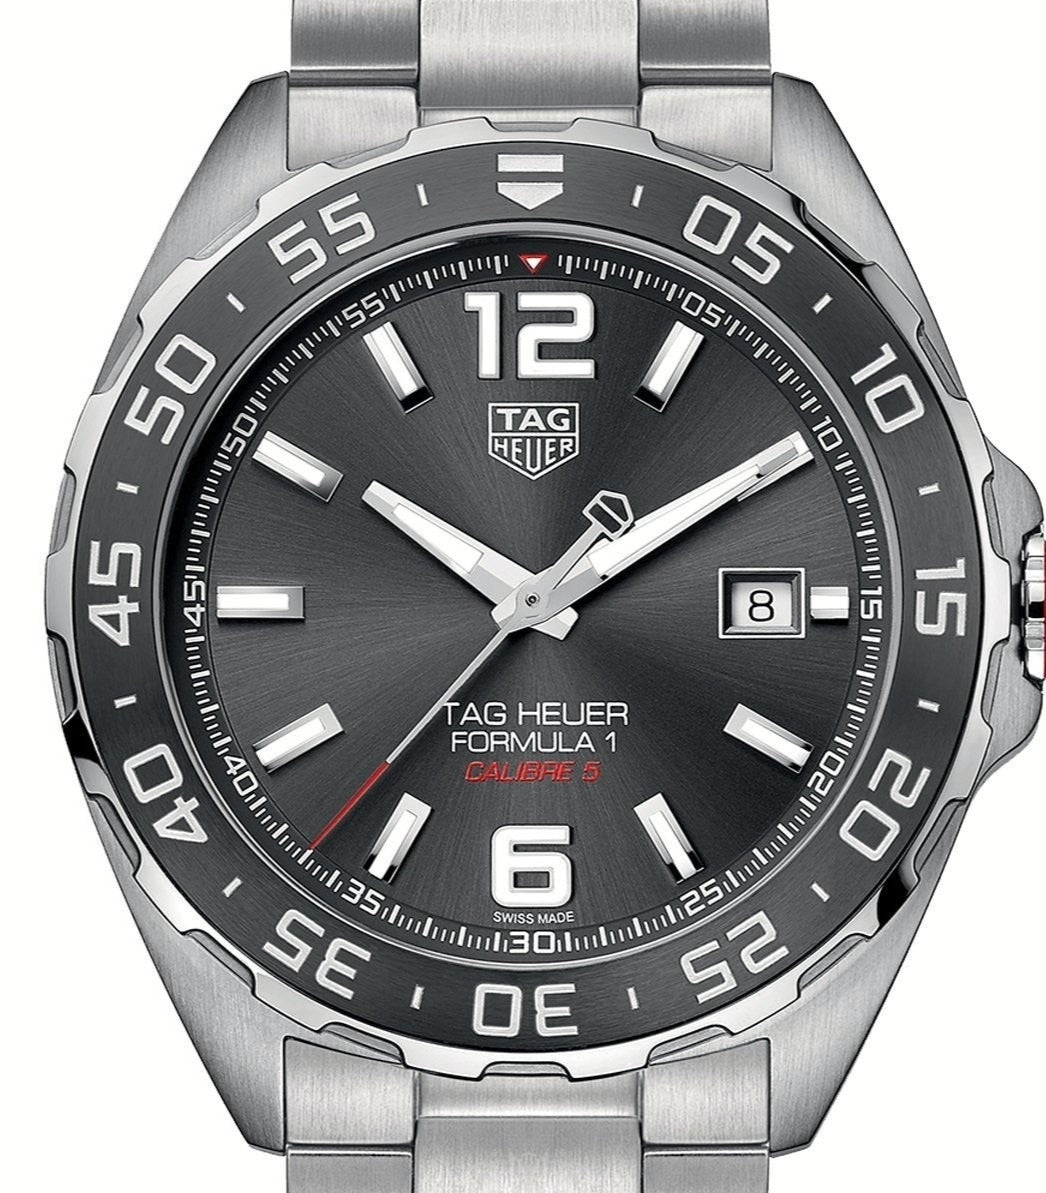 Tag Heuer Formula 1 Calibre 5 Chronograph Anthracite Dial Silver Steel Strap Watch for Men - WAZ2011.BA0842